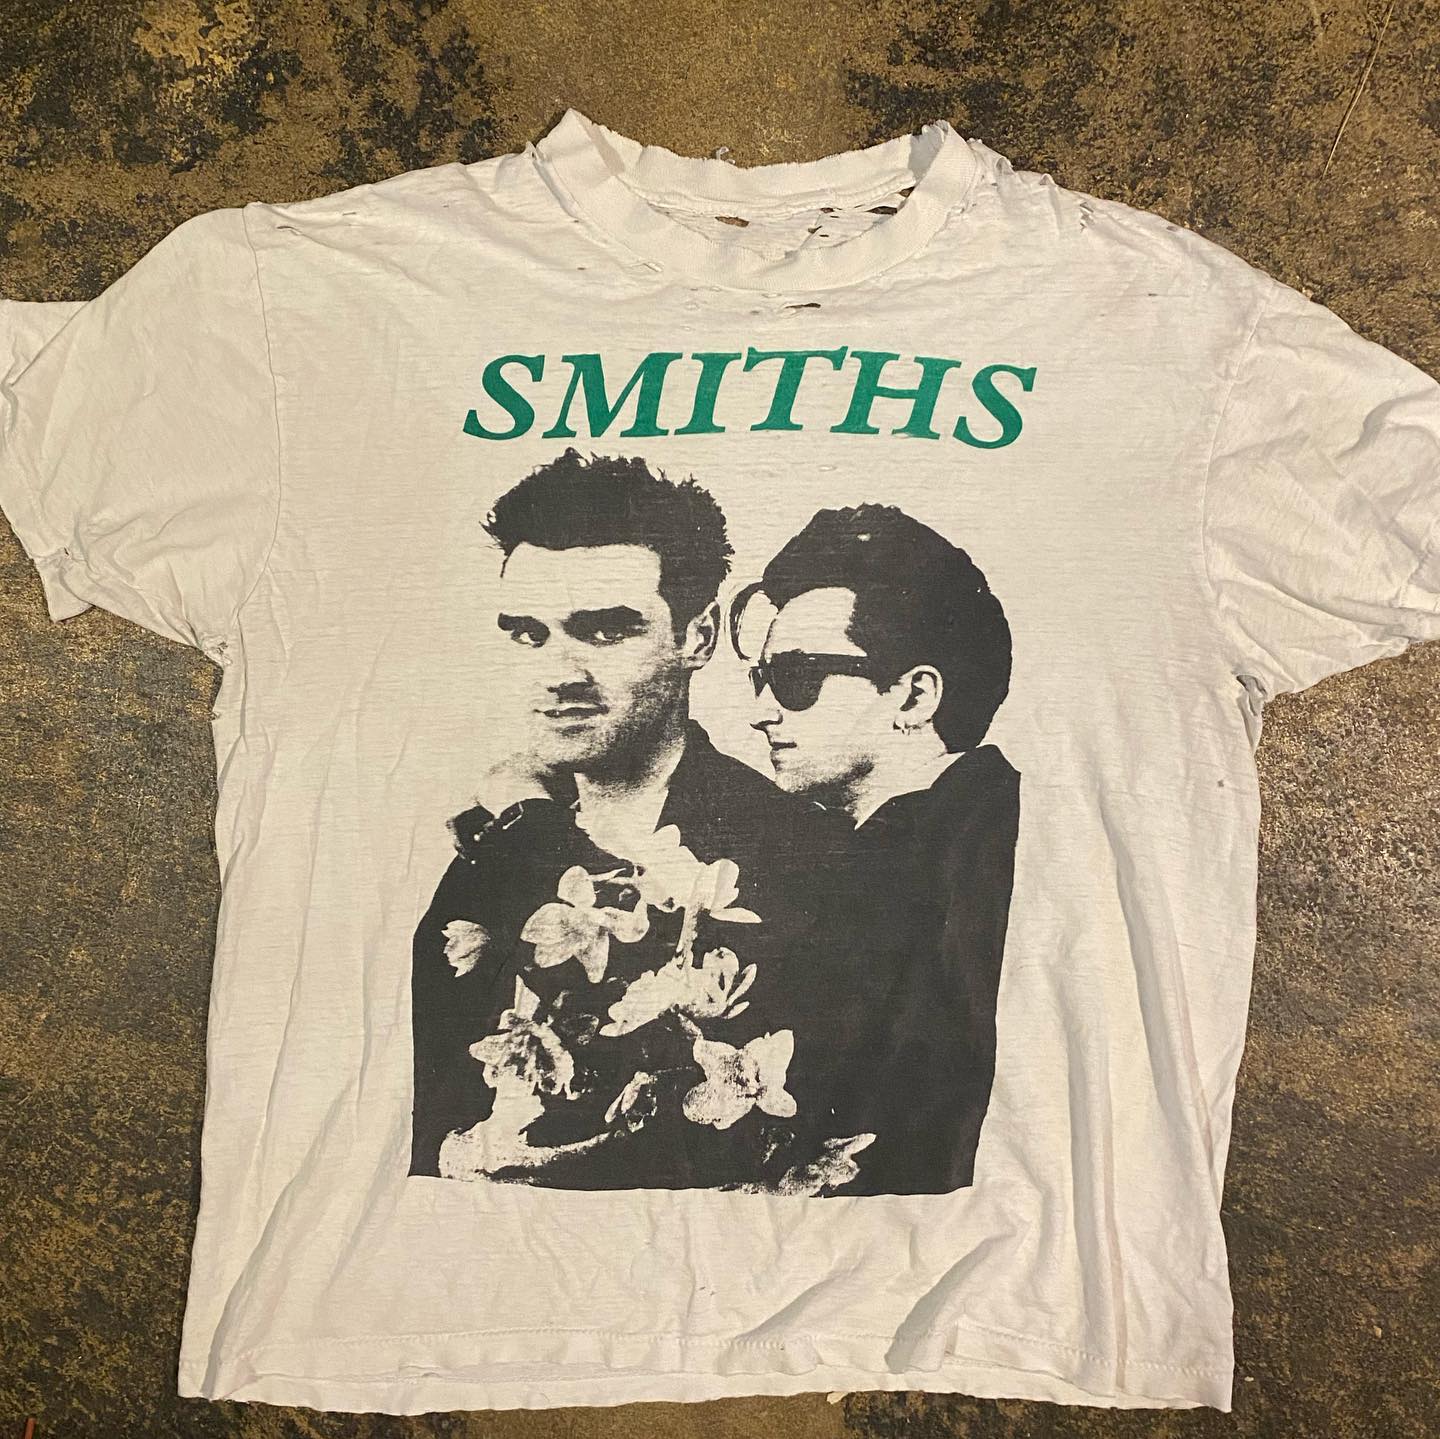 Smiths and Morrissey Shirt M – Wax Moon